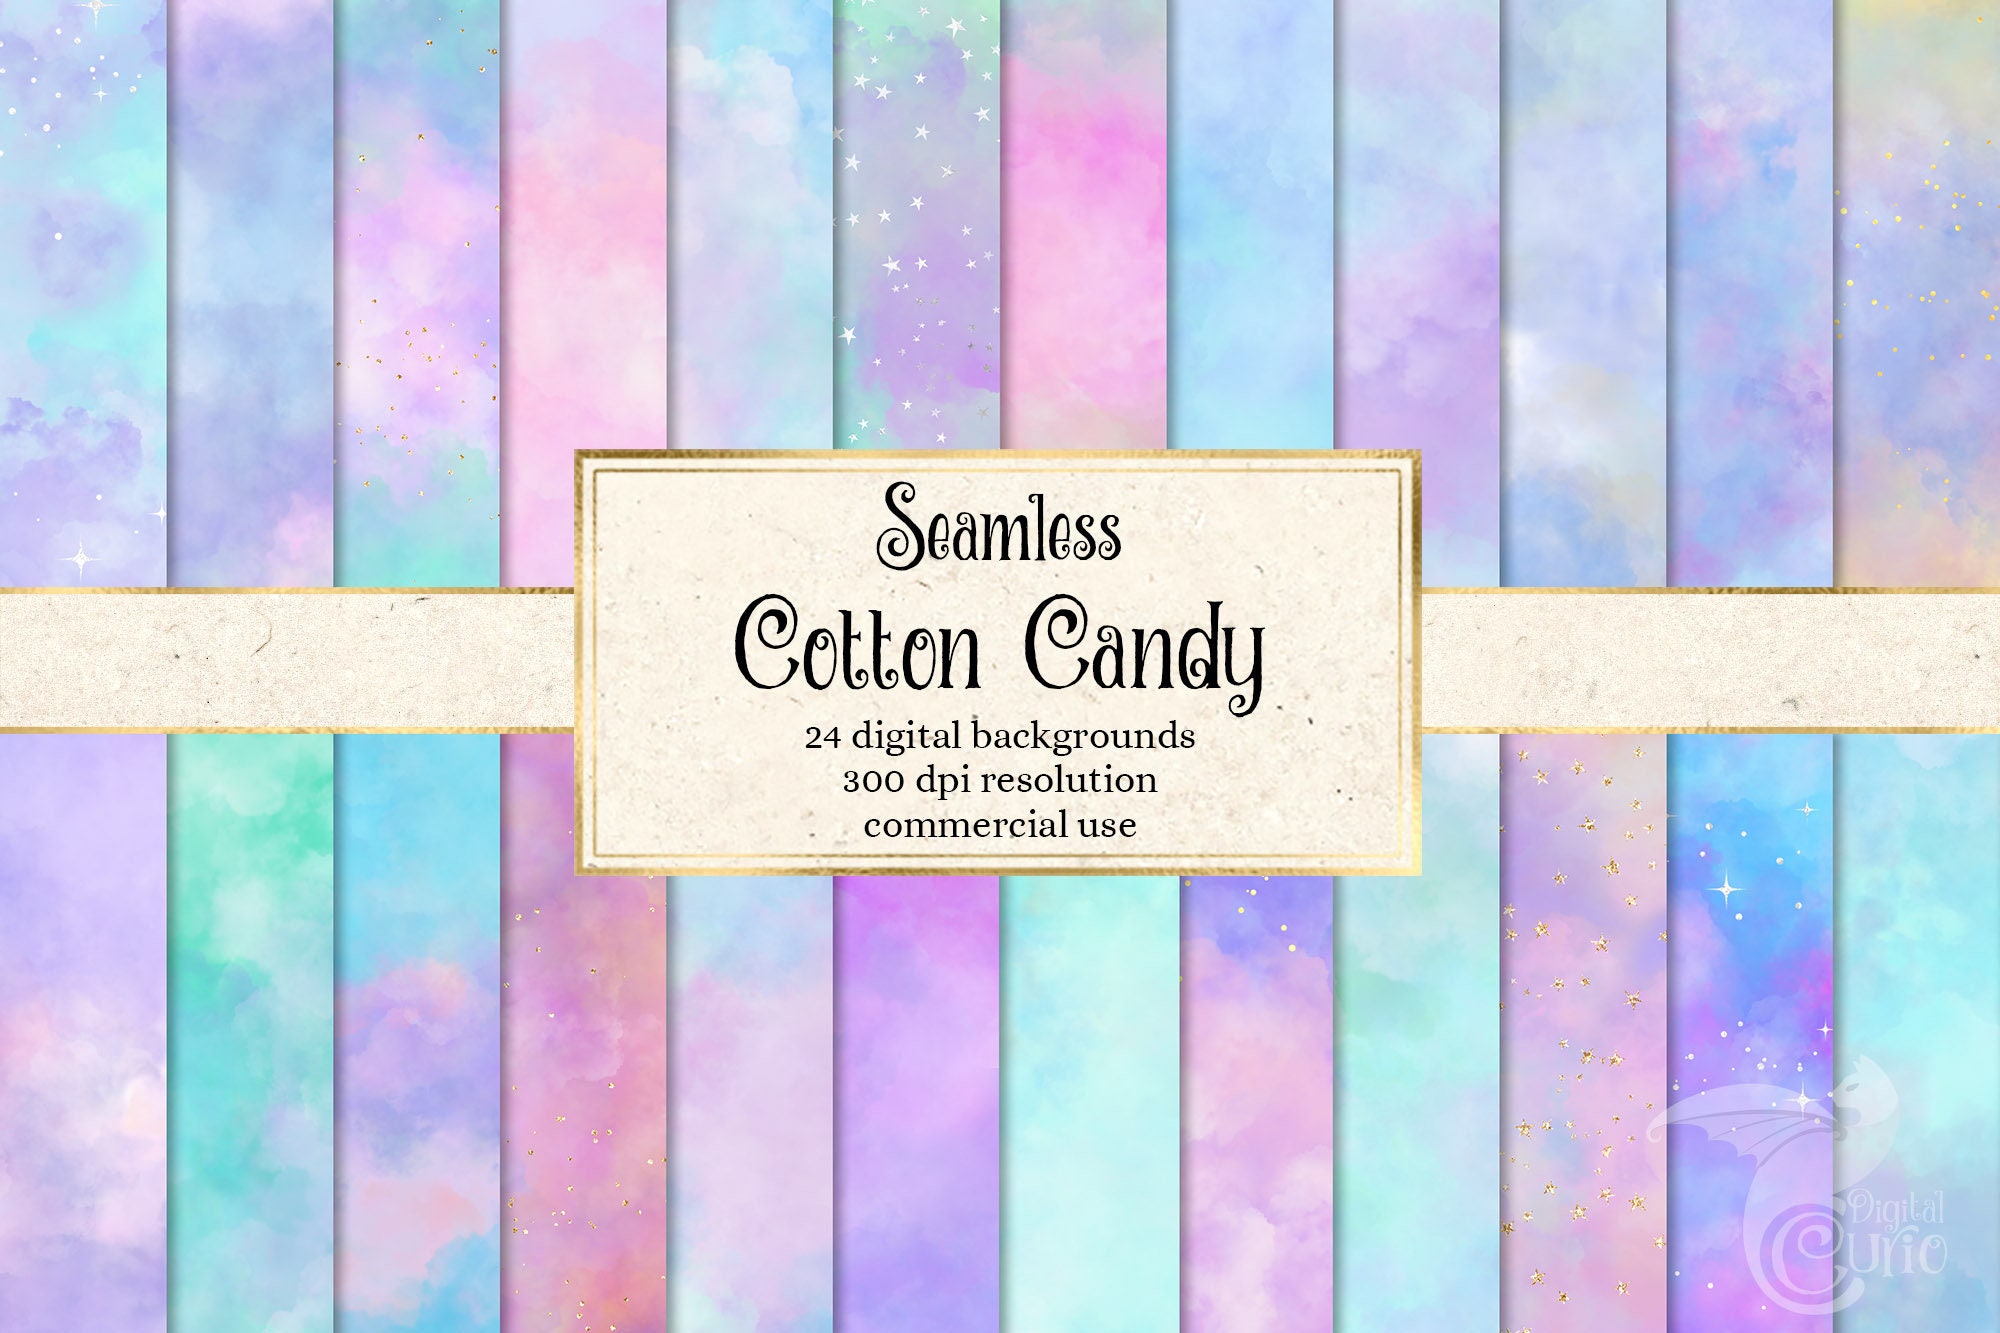 American Crafts Textured Cardstock 12x12 Cotton Candy